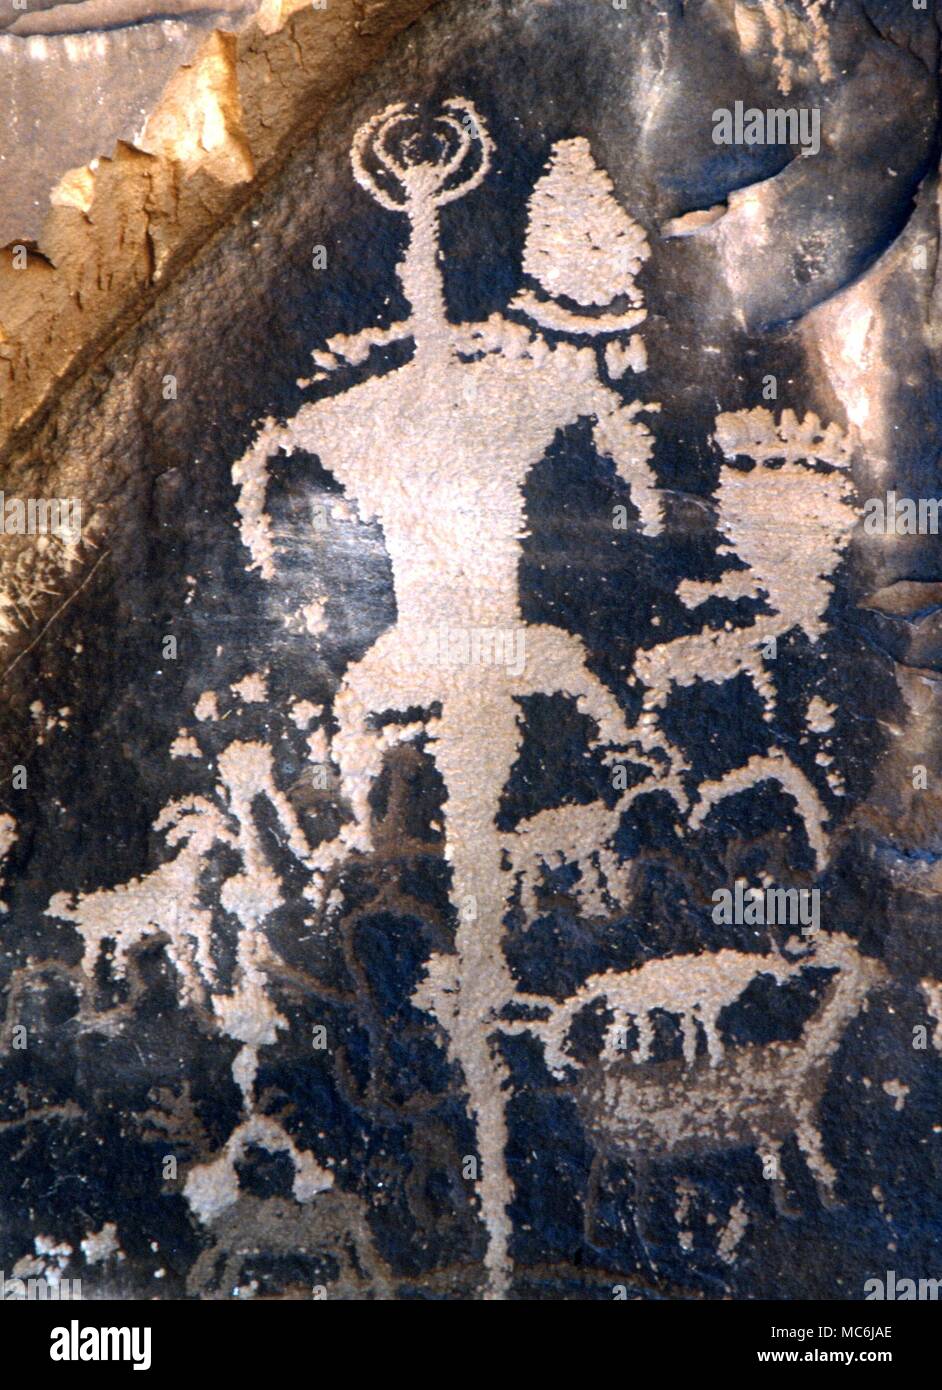 CAVE ART. Pictograph of a 'lizard-man' carved by shamans or indian artists, on the so-called Newspaper Rock in Utah, USA Stock Photo